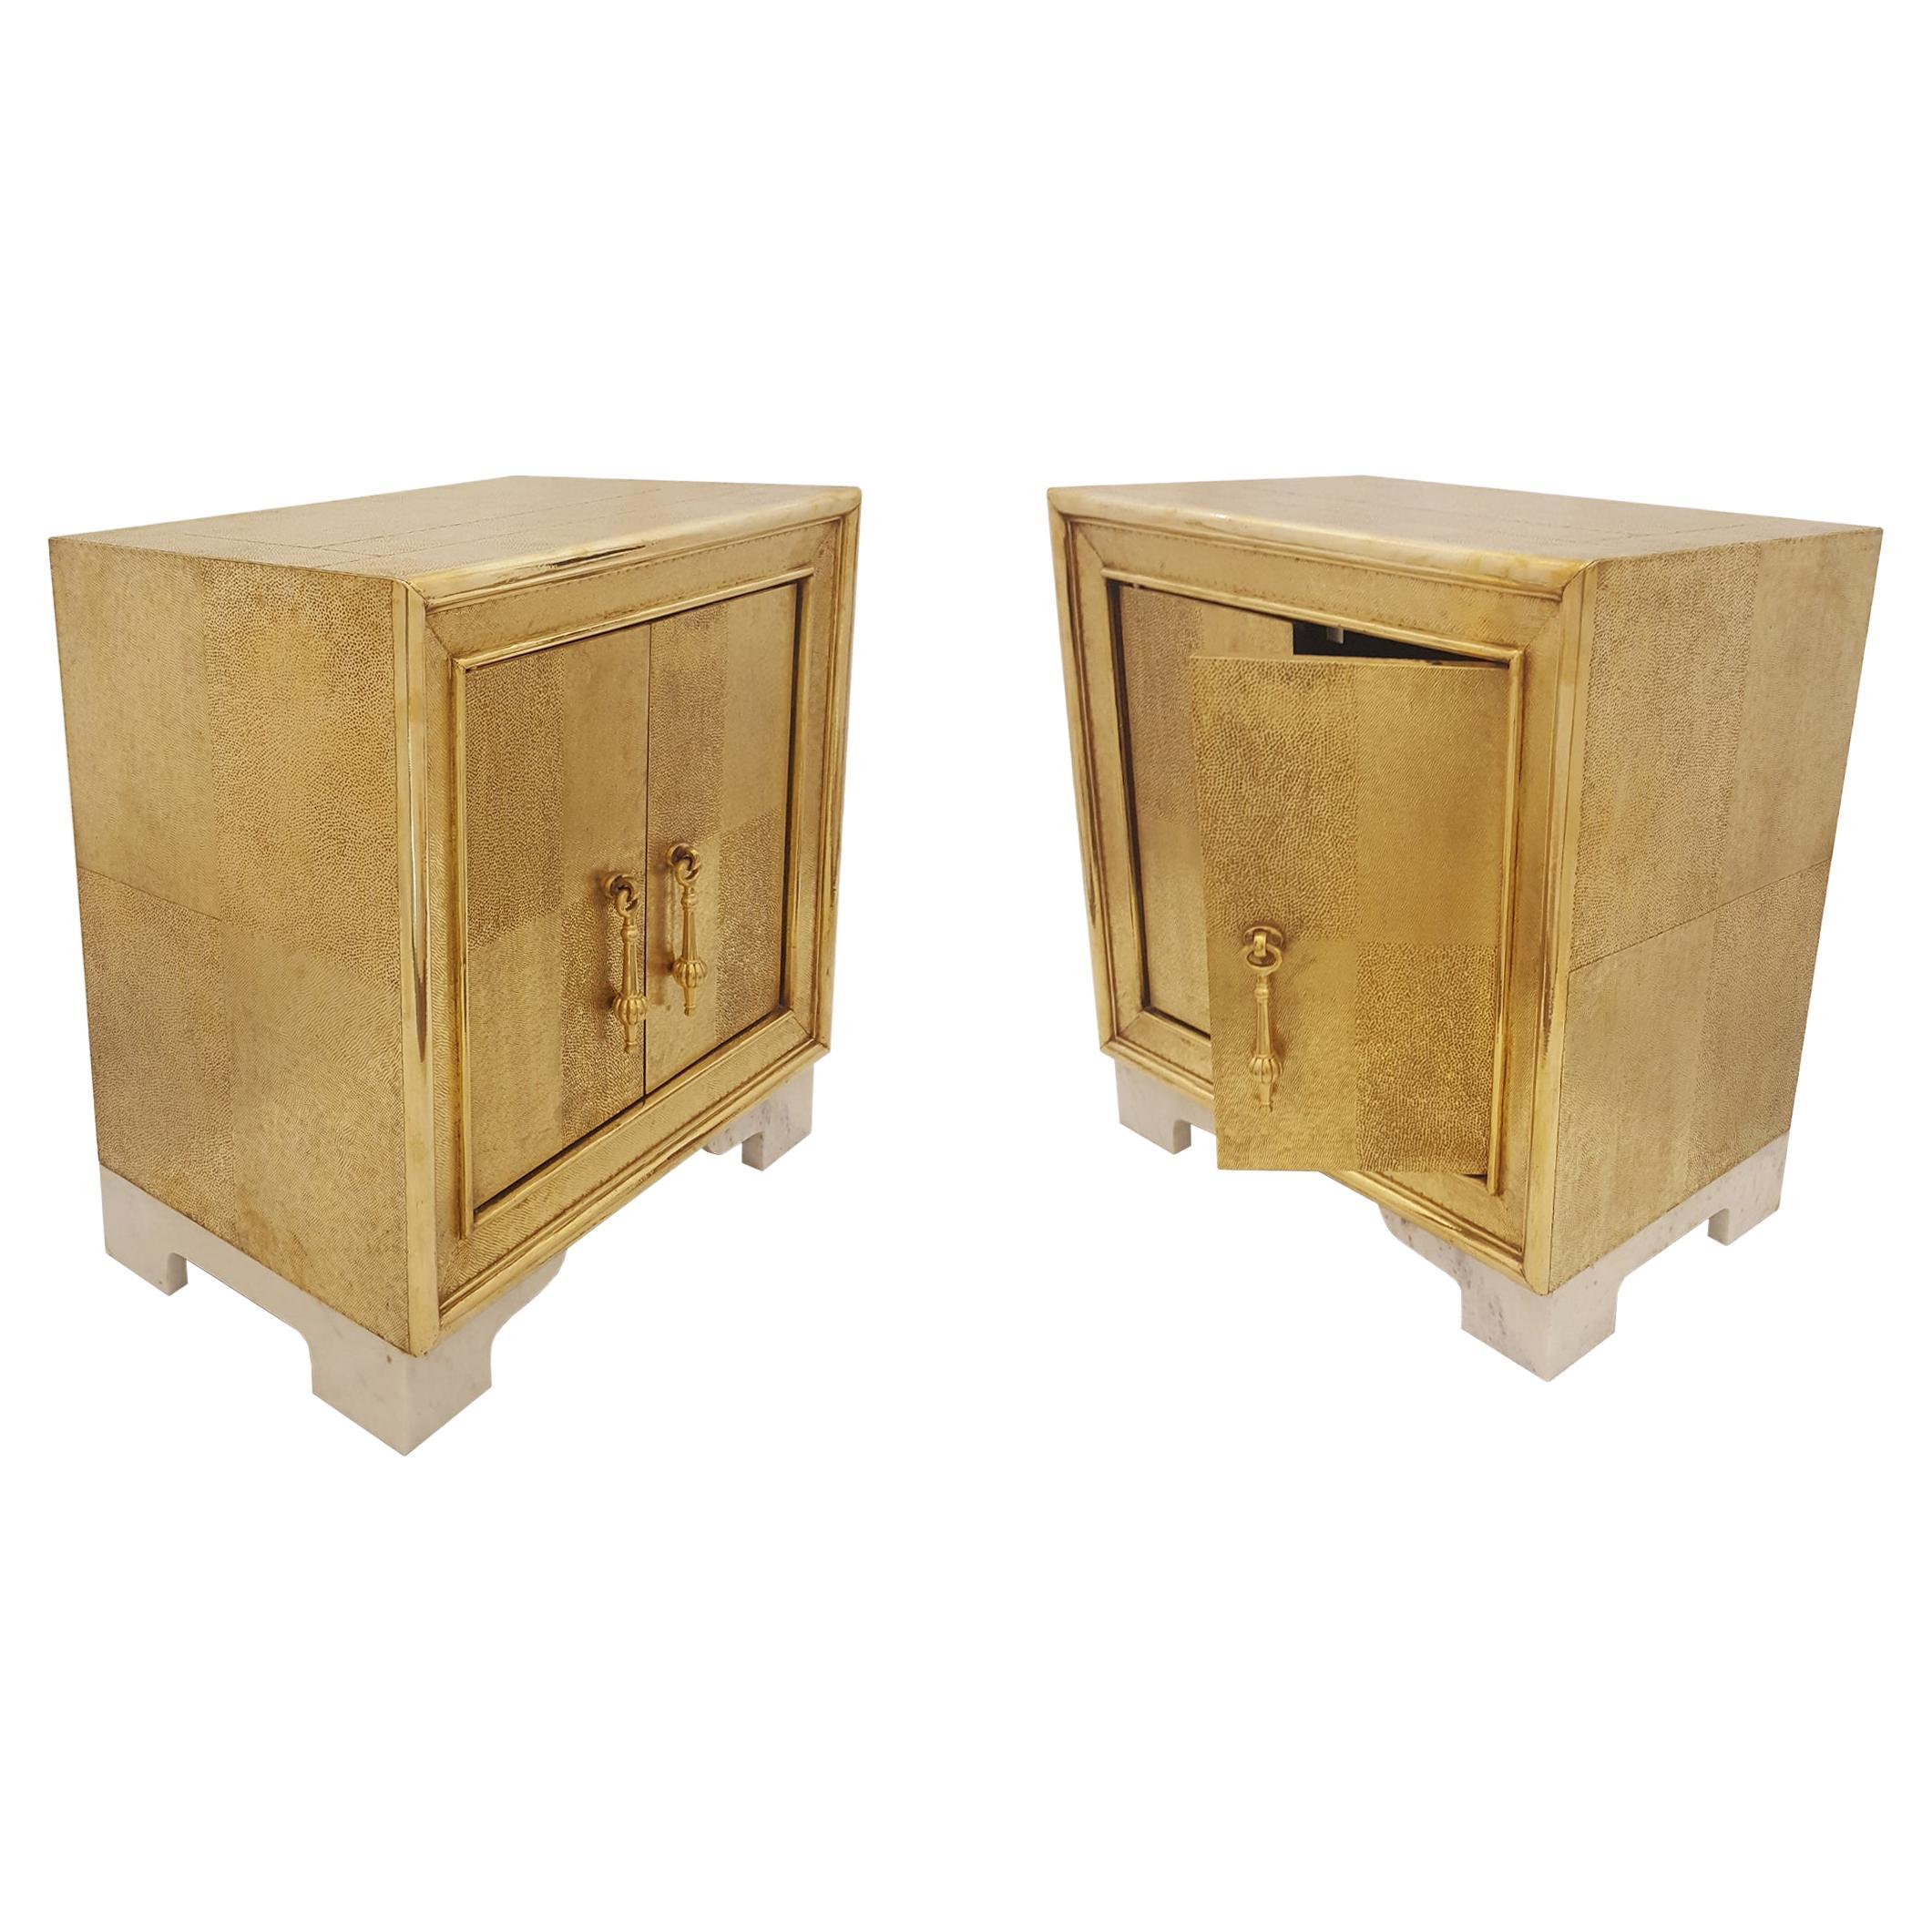 Set of Two Carre Nightstands in Brass Clad over Teakwood Handcrafted in India